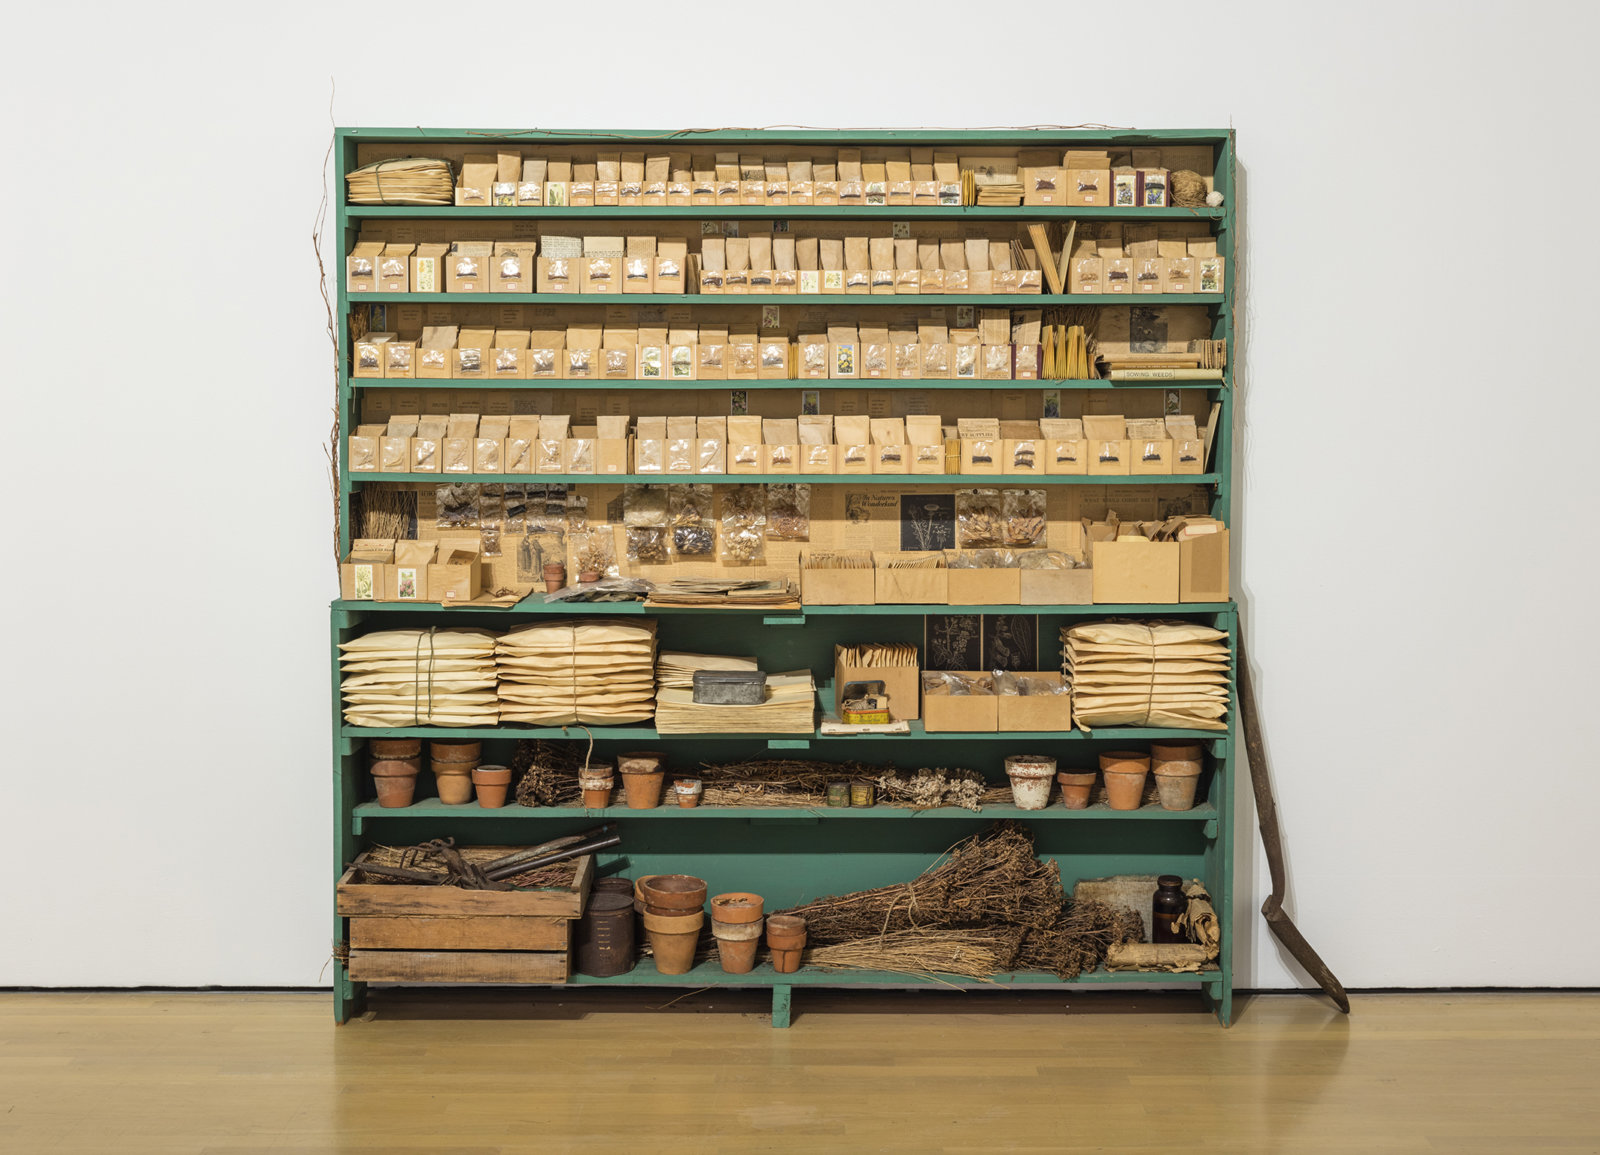 Liz Magor, Sowing Weeds in Lanes and Ditches, 1976,  wooden shelf, seeds, grass, envelopes, boxes, garden gloves, clay pots, 77 x 77 x 11 in. (196 x 196 x 27 cm)